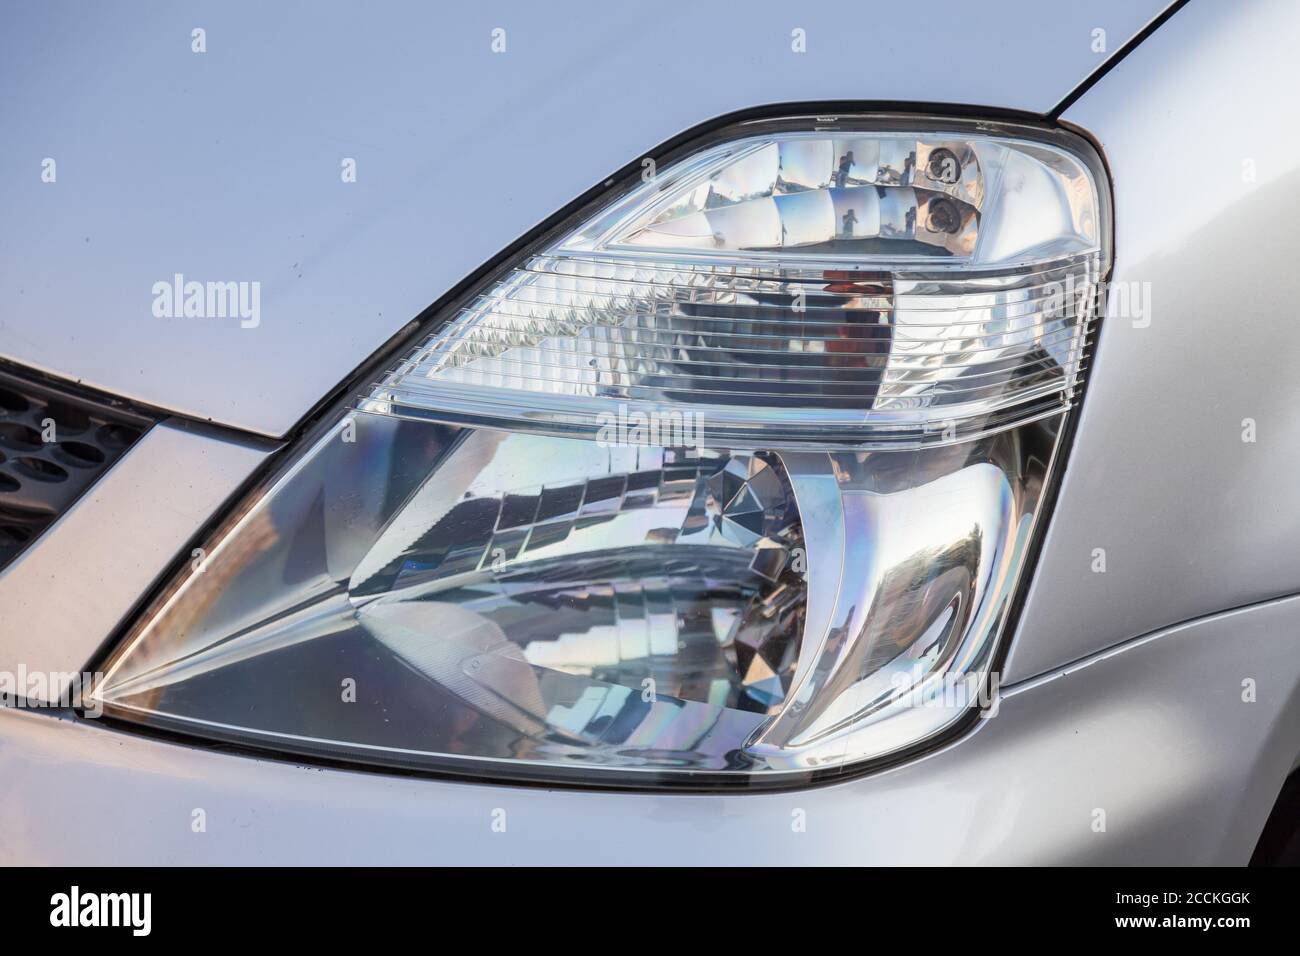 Close-up of the front glass transparent headlight of a Japanese car in silvery color after being replaced in a car service after an accident. Stock Photo